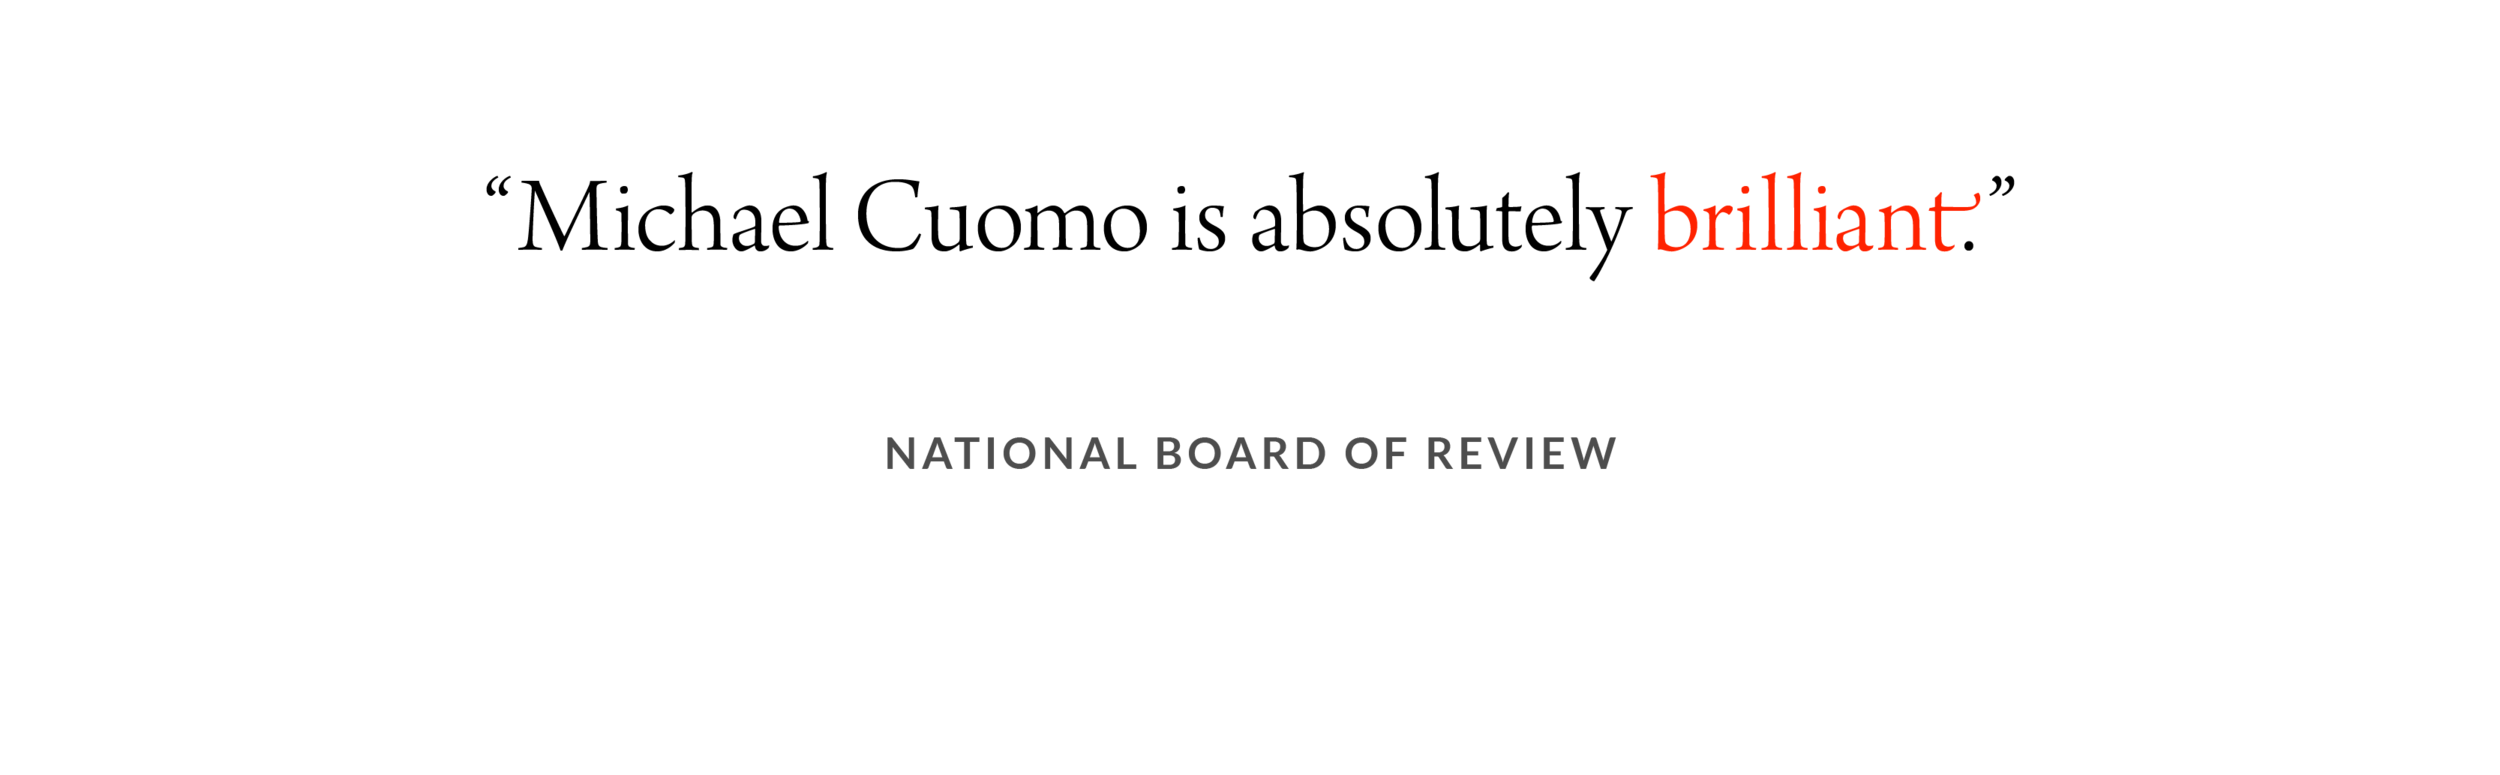 Michael Cuomo is Absolutely Brilliant. –National Board of Review